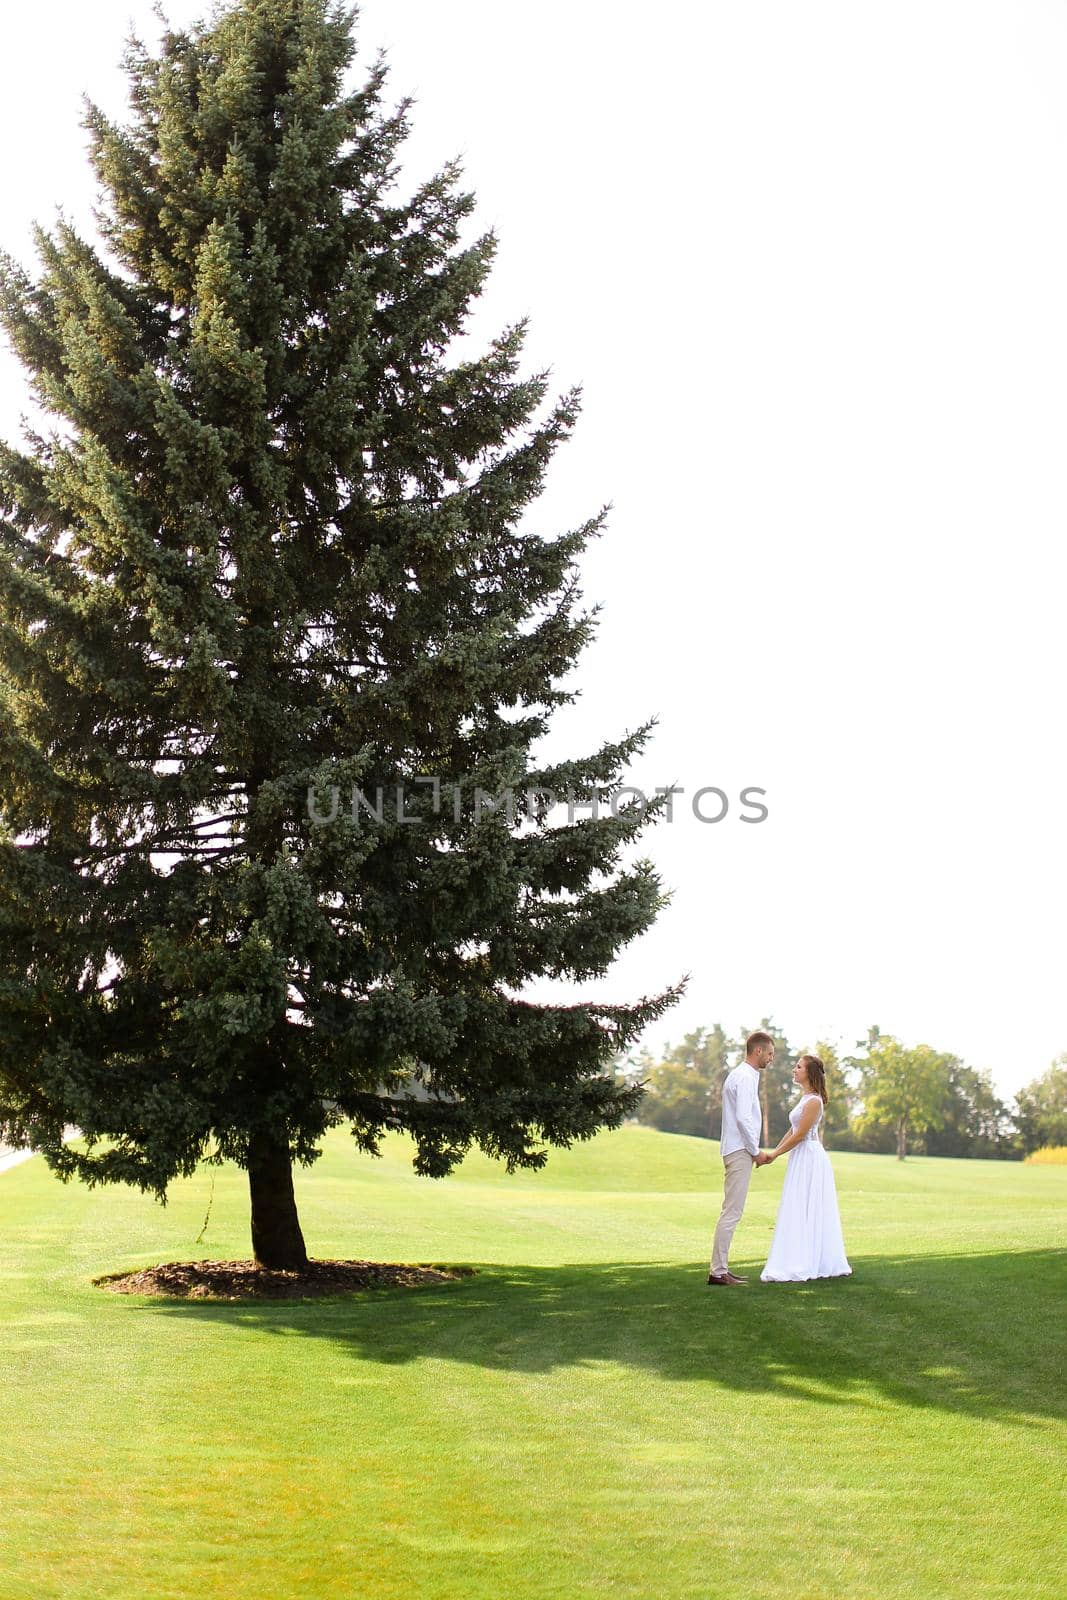 Young american bride and groom walking near green big spruce on grass in white sky background. Concept of evergreens and wedding.